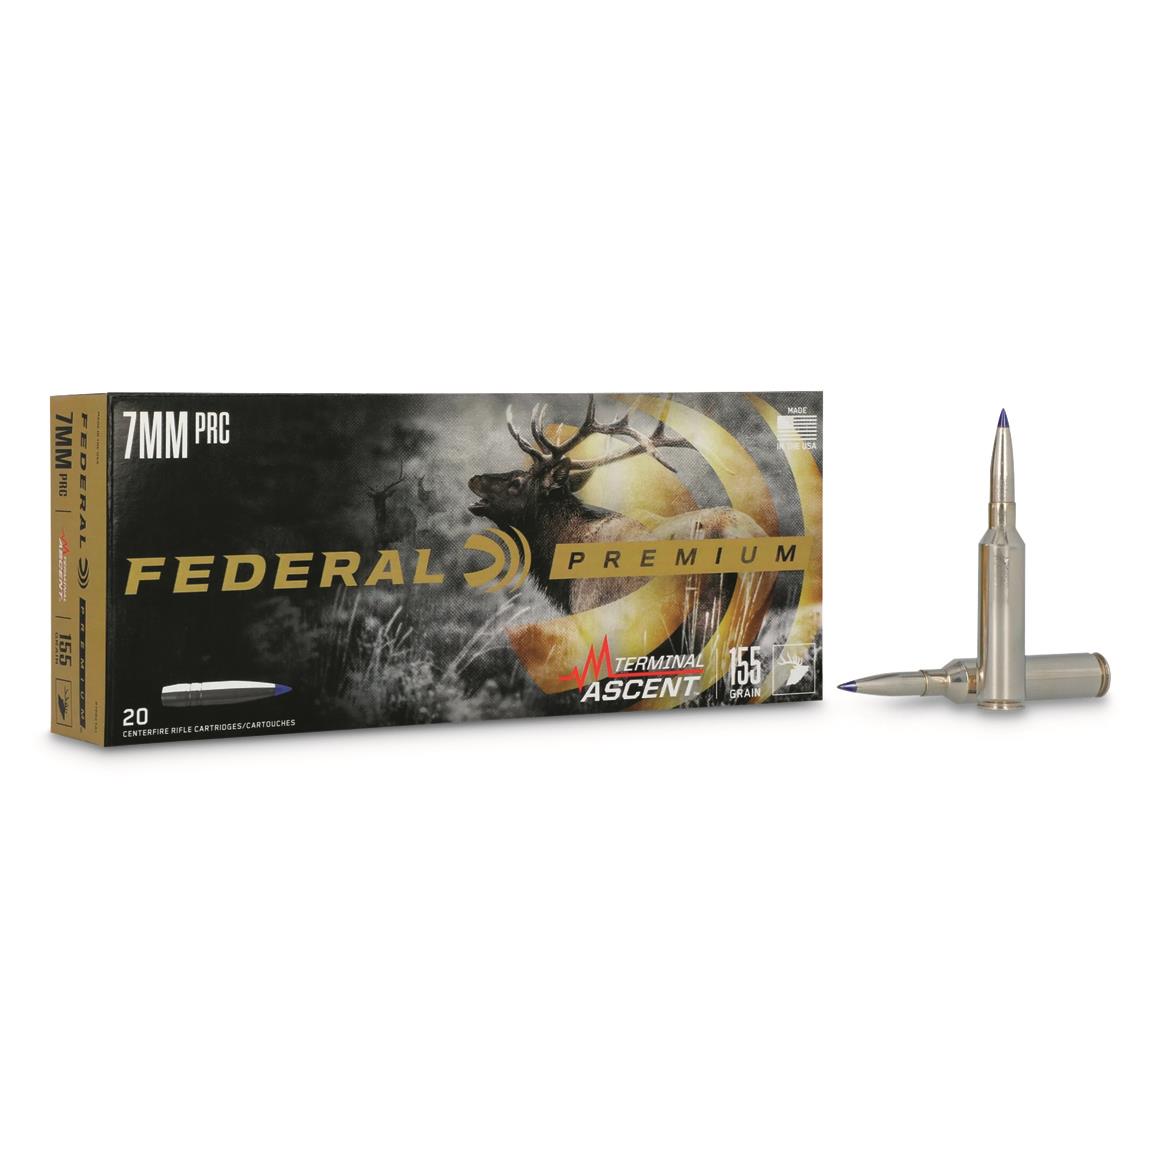 Federal Premium Terminal Ascent, 7mm PRC, Bonded Polymer Tip, 155 Grain, 20 Rounds